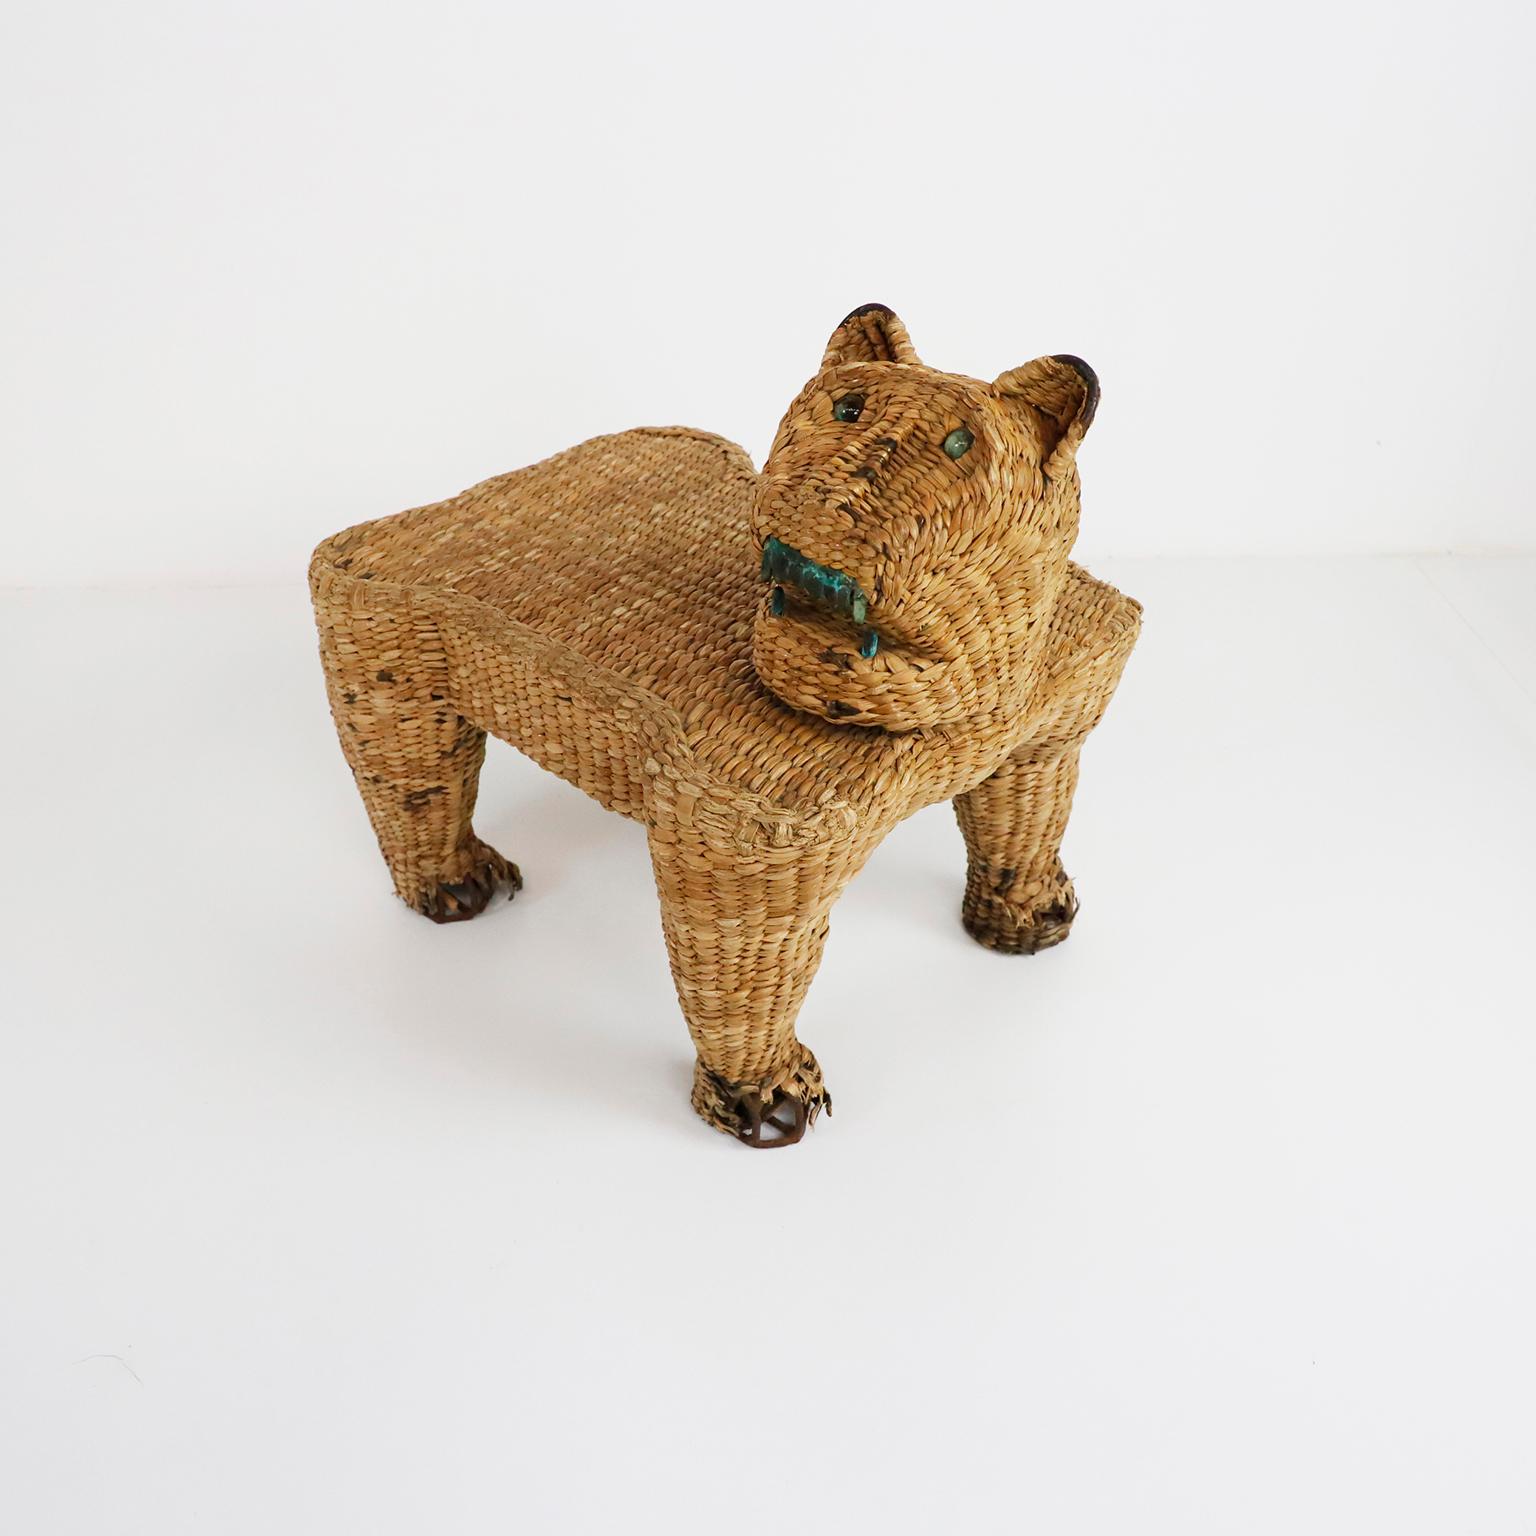 Circa 1970, we offer this Antique Mario Lopez Torres Jaguar Petite Stool, made in natural woven and iron structure, the eyes are made in precious stone.